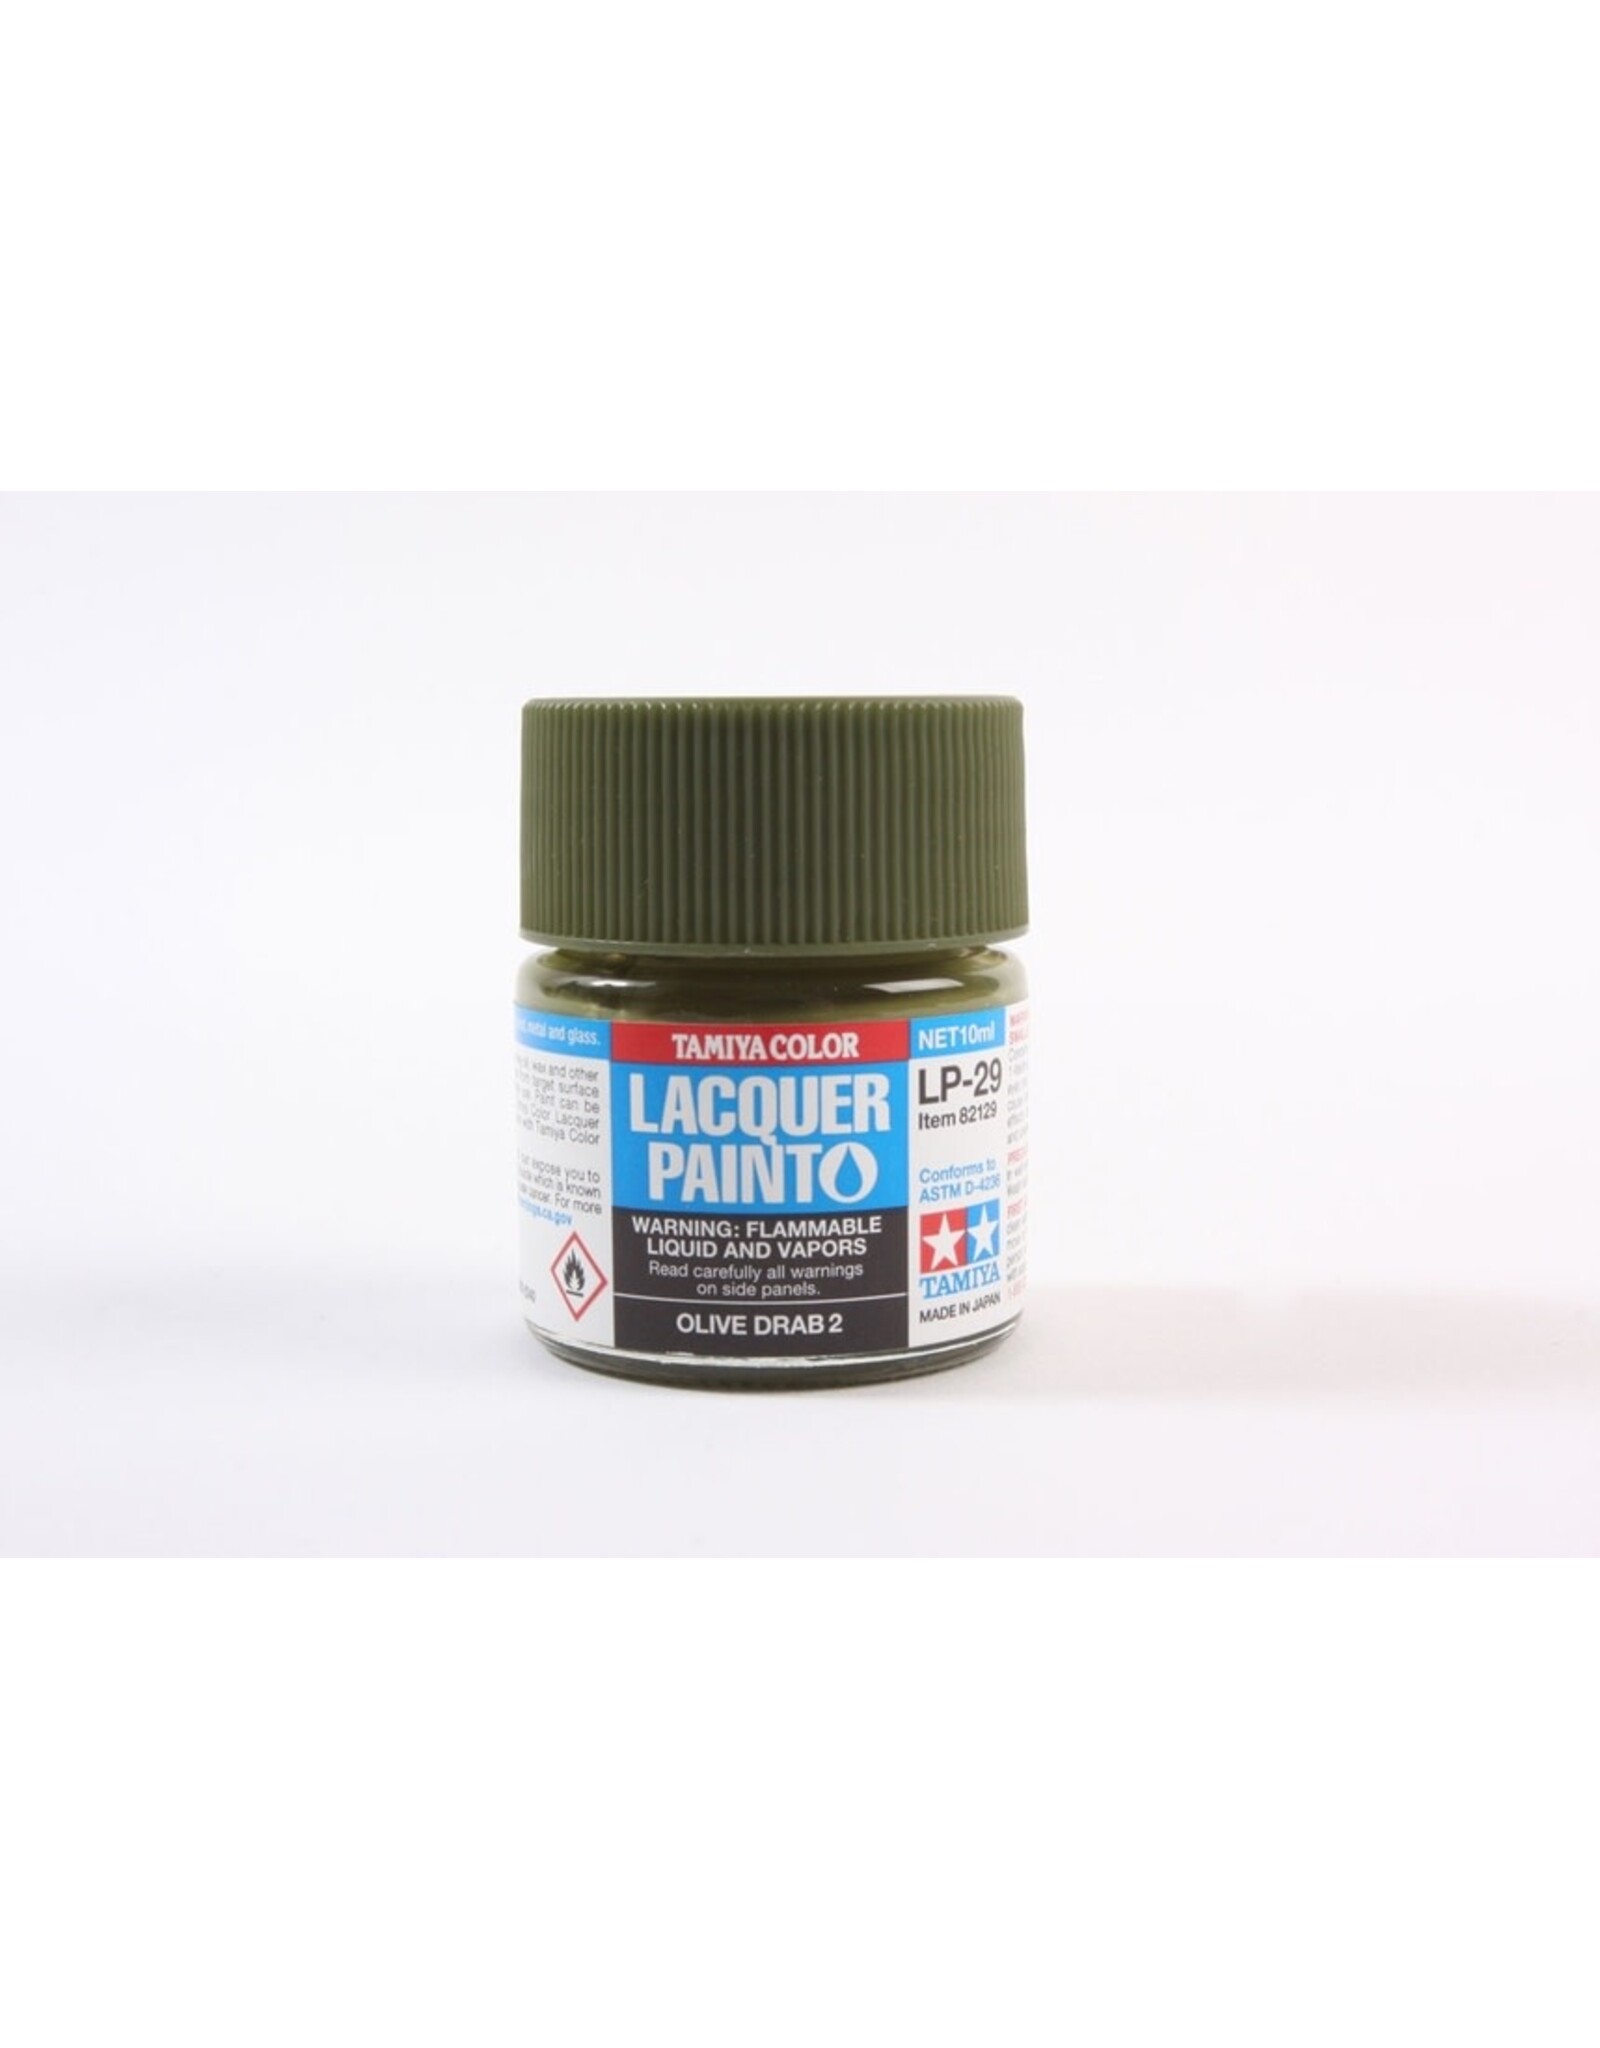 Tamiya Lacquer Paint LP-29 Olive Drab 2 10ml Bottle